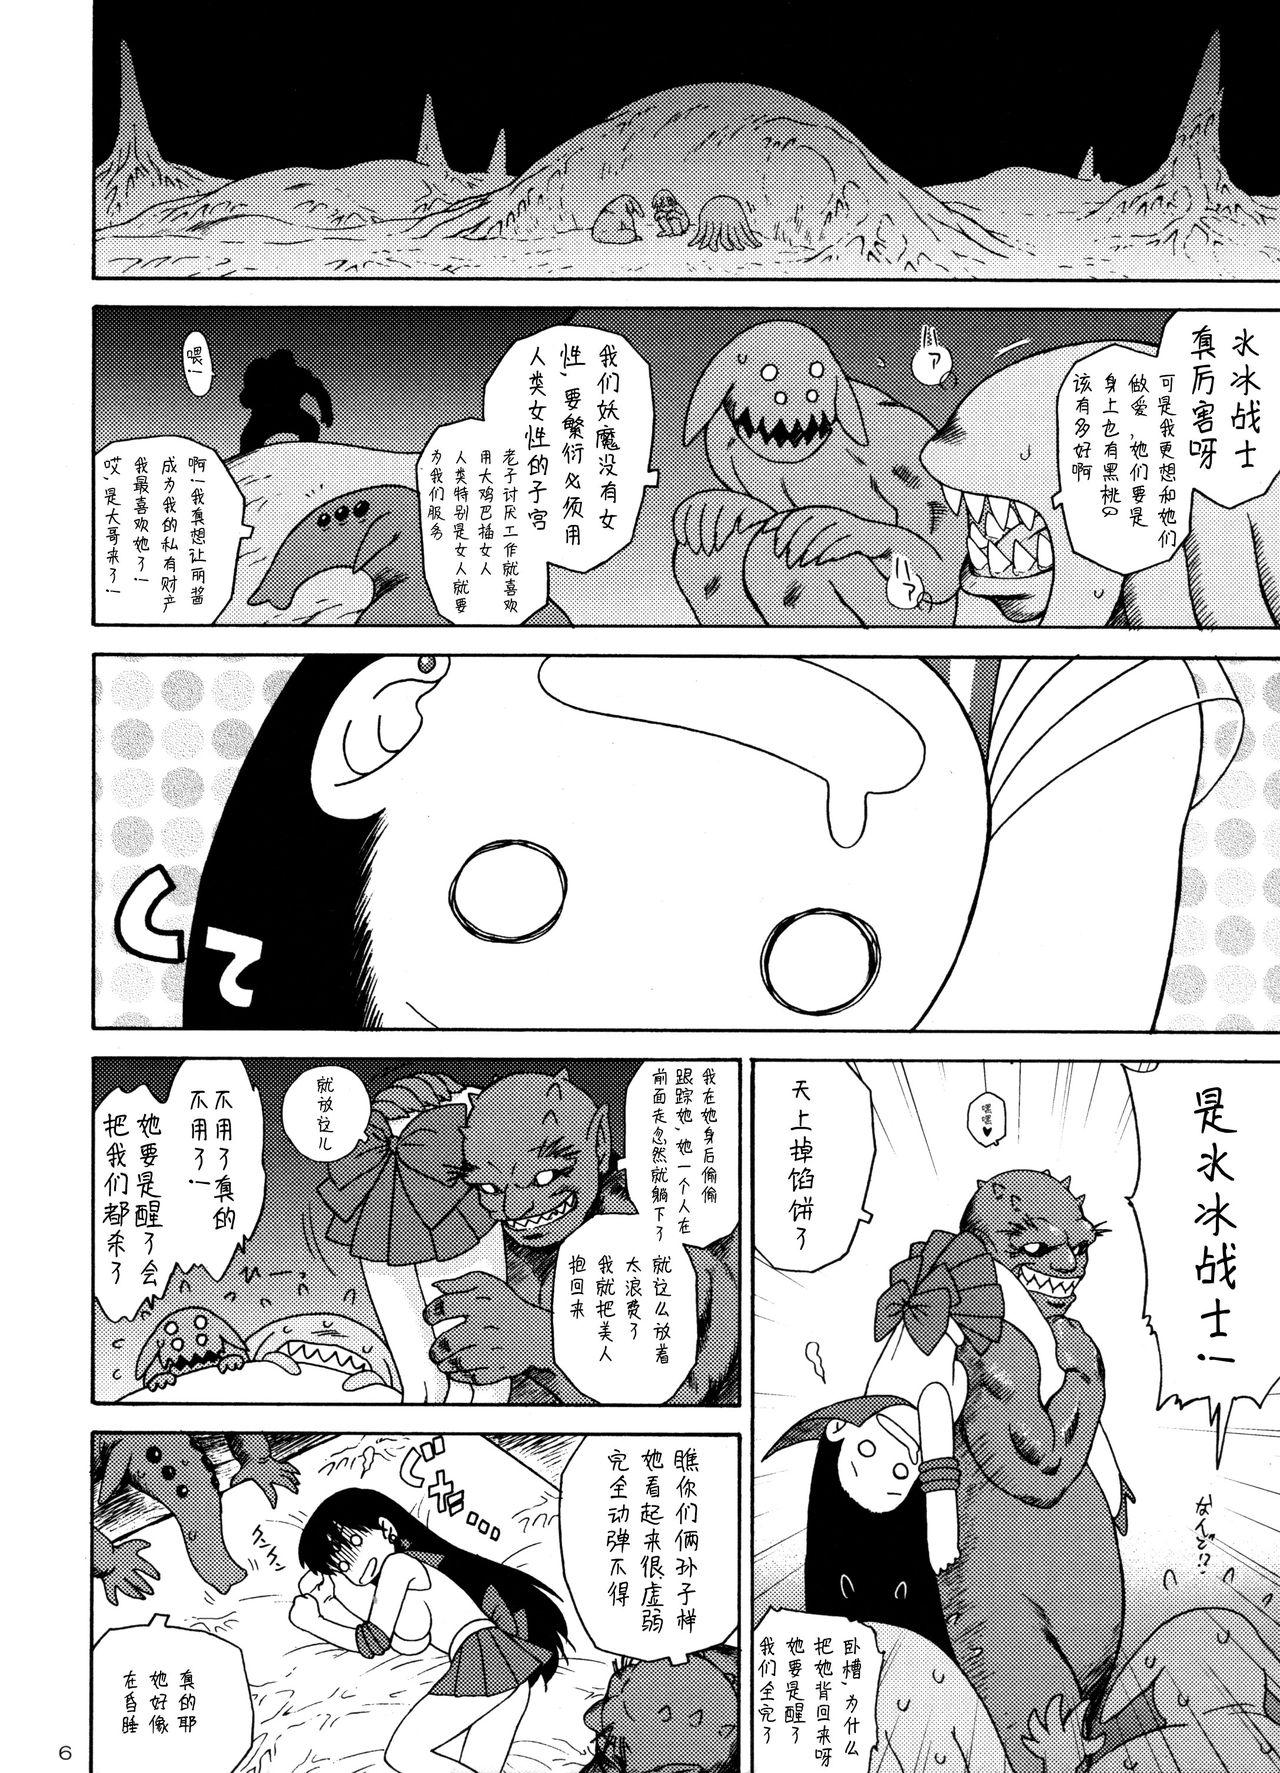 Indonesian QUEEN OF SPADES - 黑桃皇后 - Sailor moon Pounded - Page 9